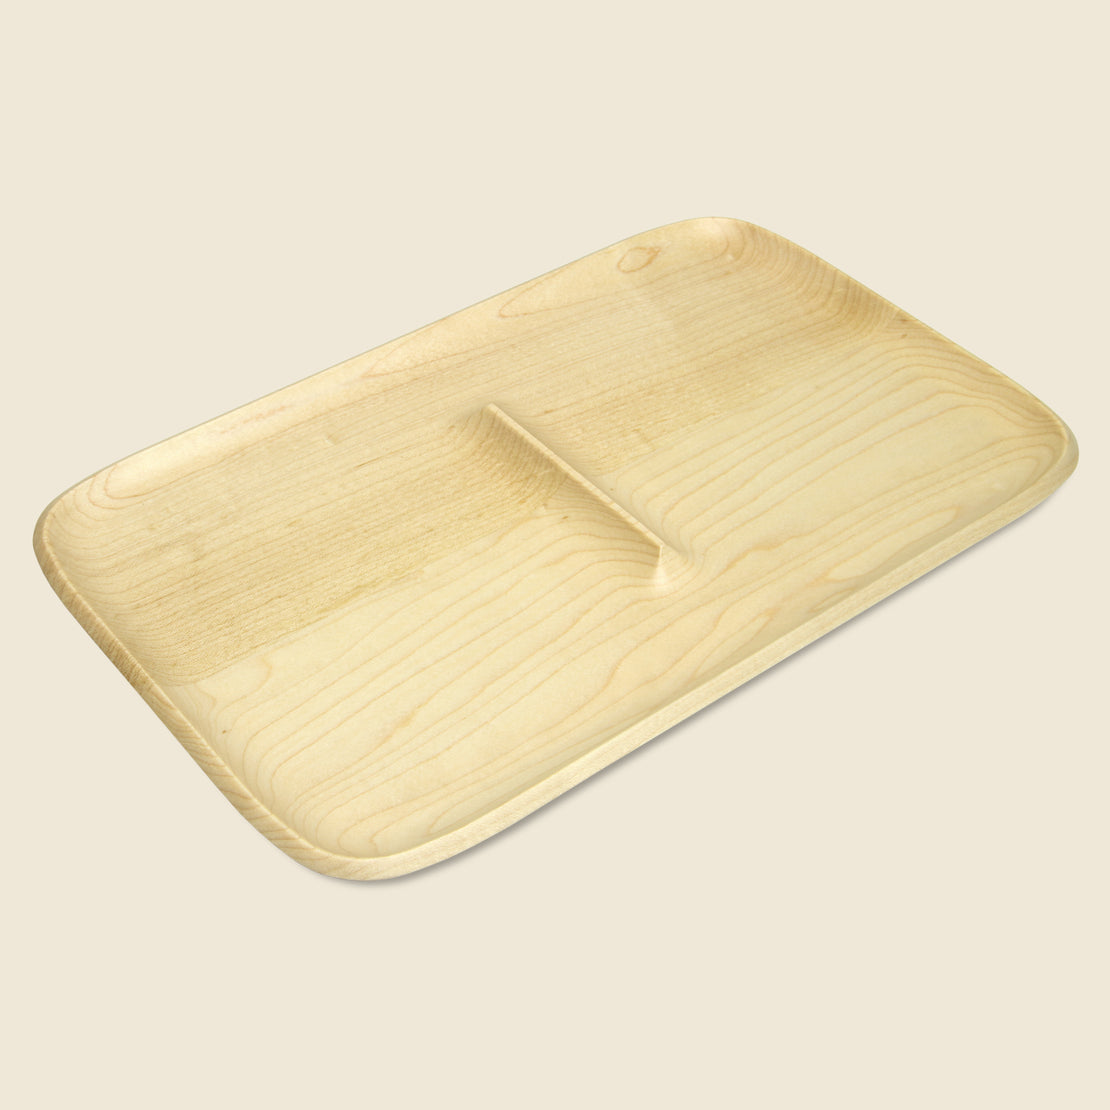 Craighill Large Catch Tray - Maple